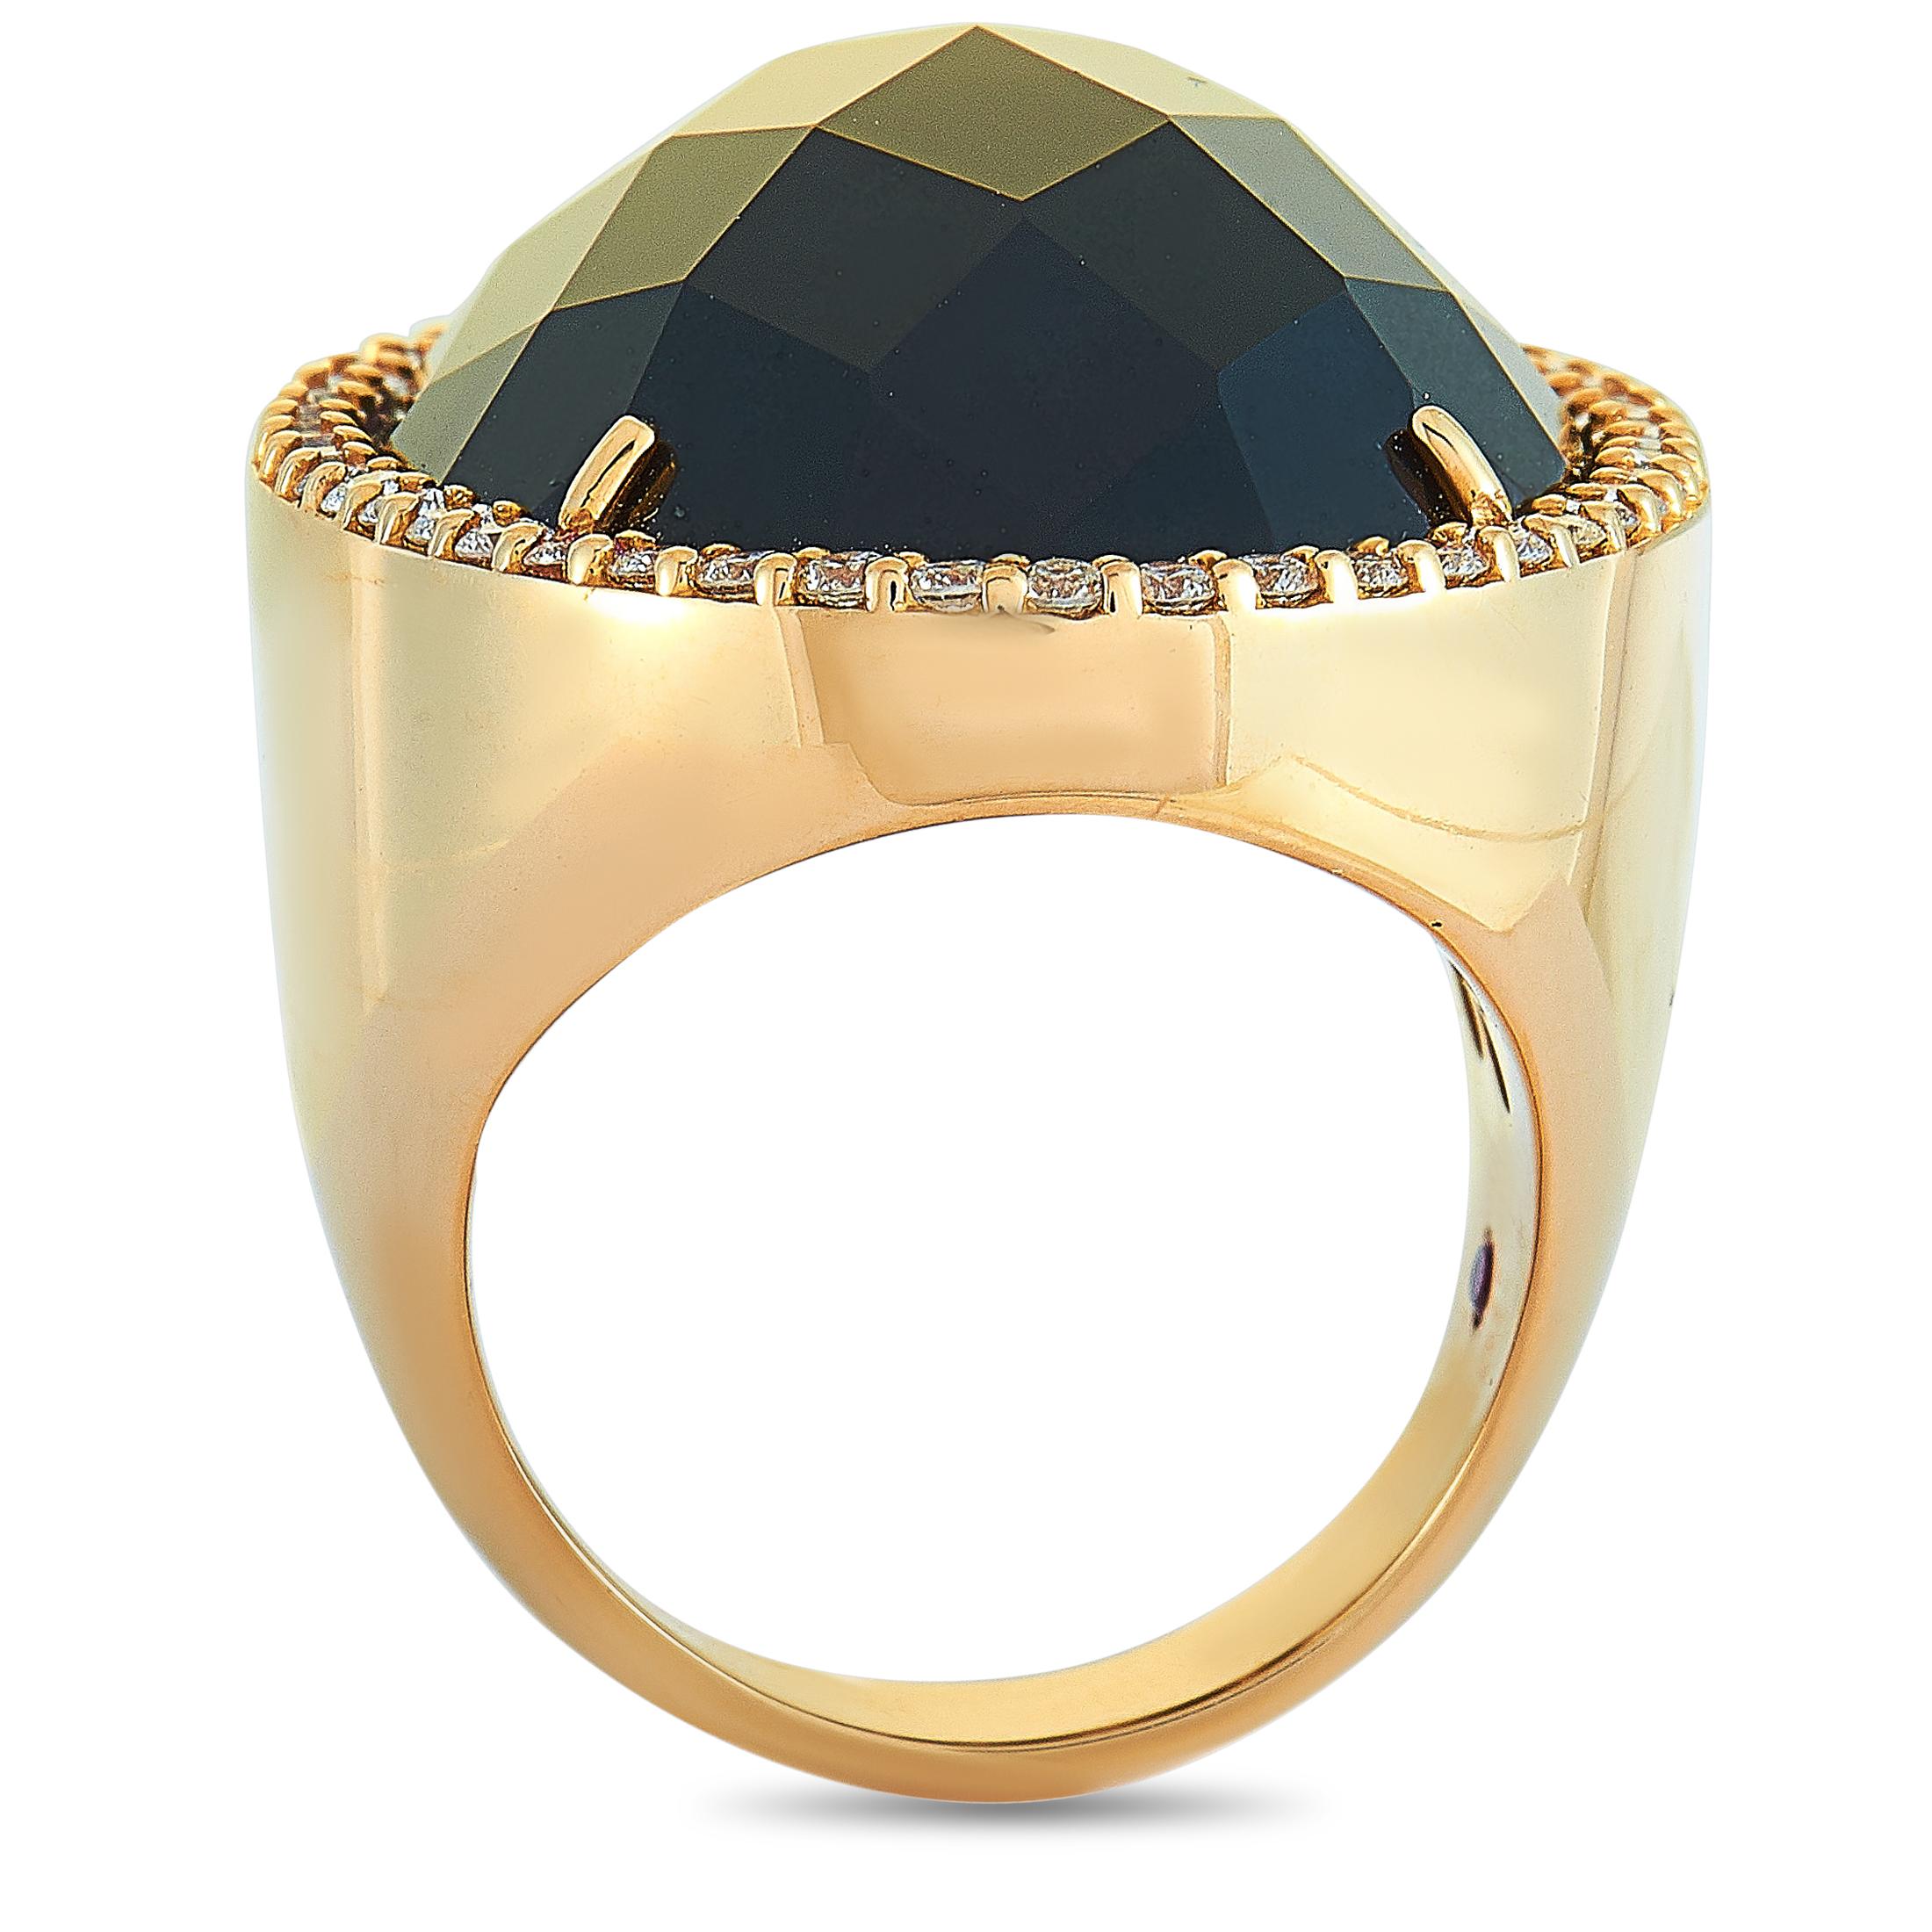 The Roberto Coin “Cocktail” ring is crafted from 18K rose gold and set with an onyx and a total of 0.90 carats of diamonds. The ring weighs 24.3 grams, boasting band thickness of 4 mm and top height of 10 mm, while top dimensions measure 24 by 32